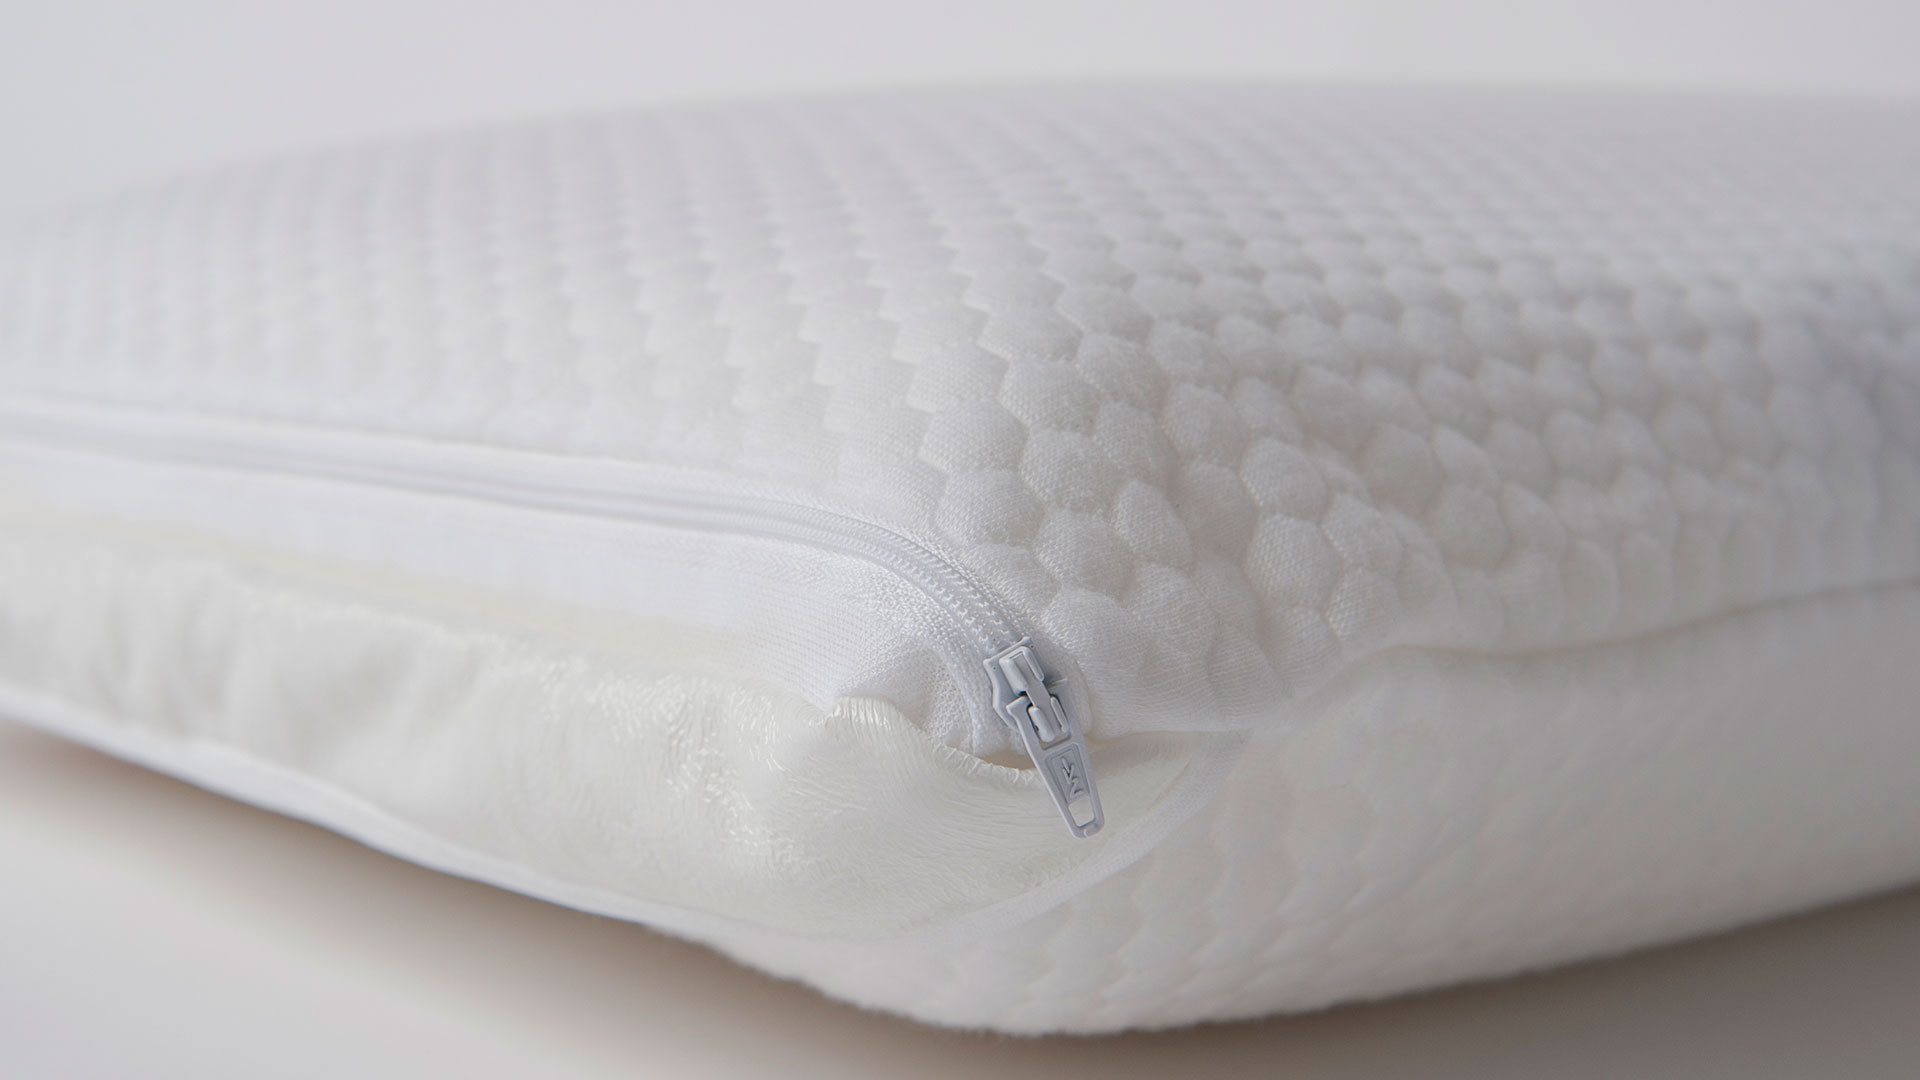 COSMETIC waterproof quilted pillow protector